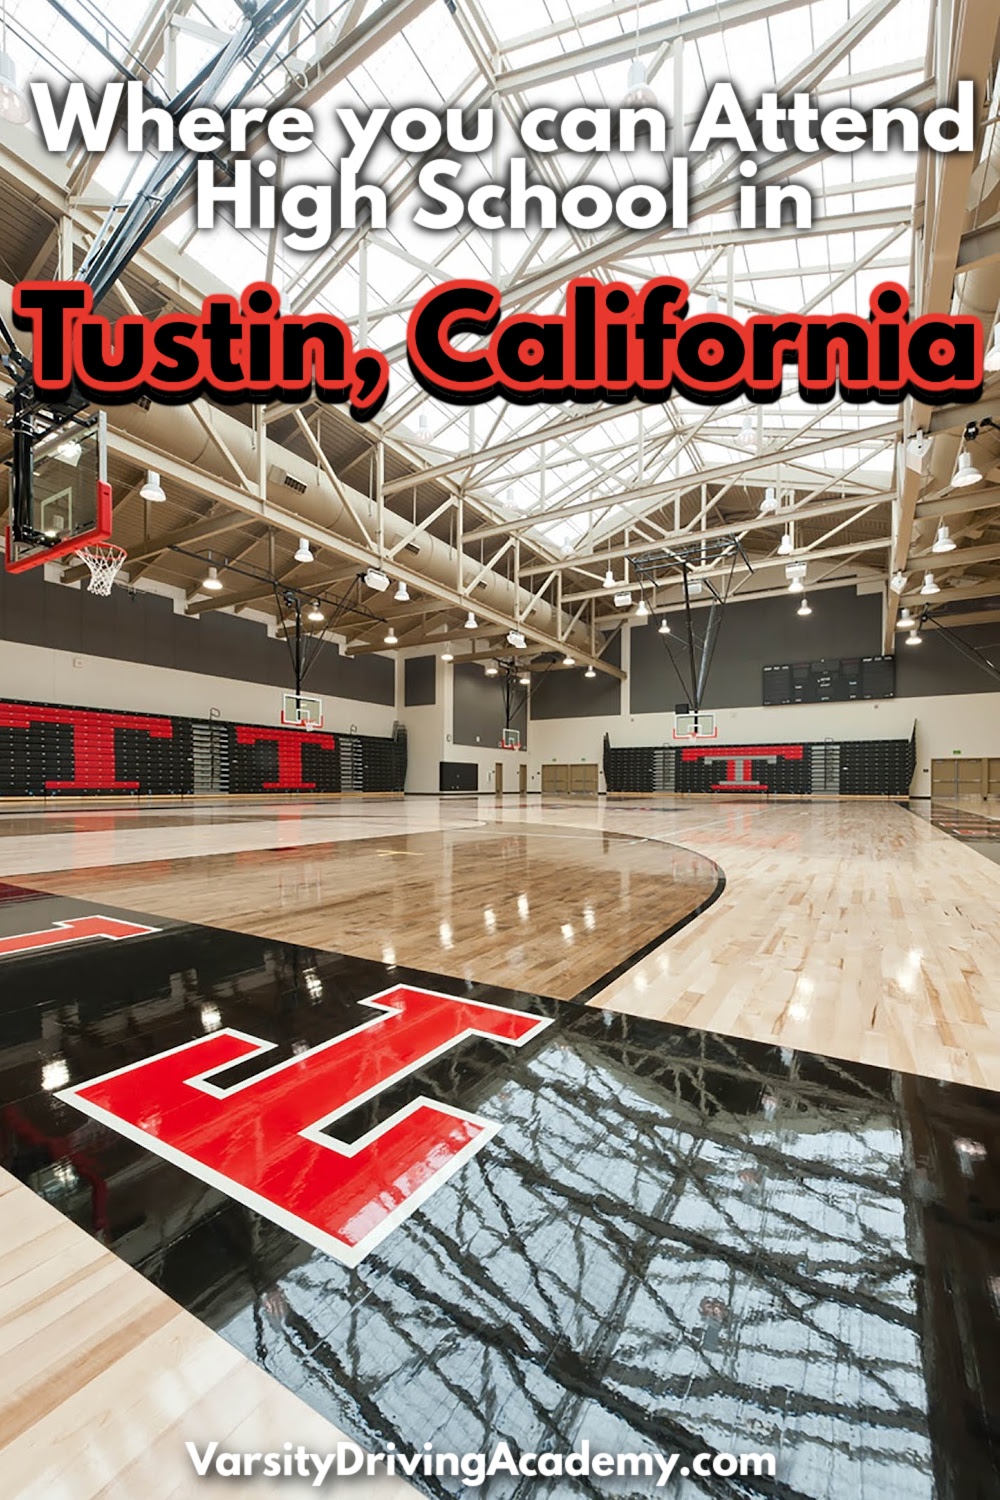 Let’s take a closer look at the boundaries of Tustin high schools and determine which one your student will be attending.